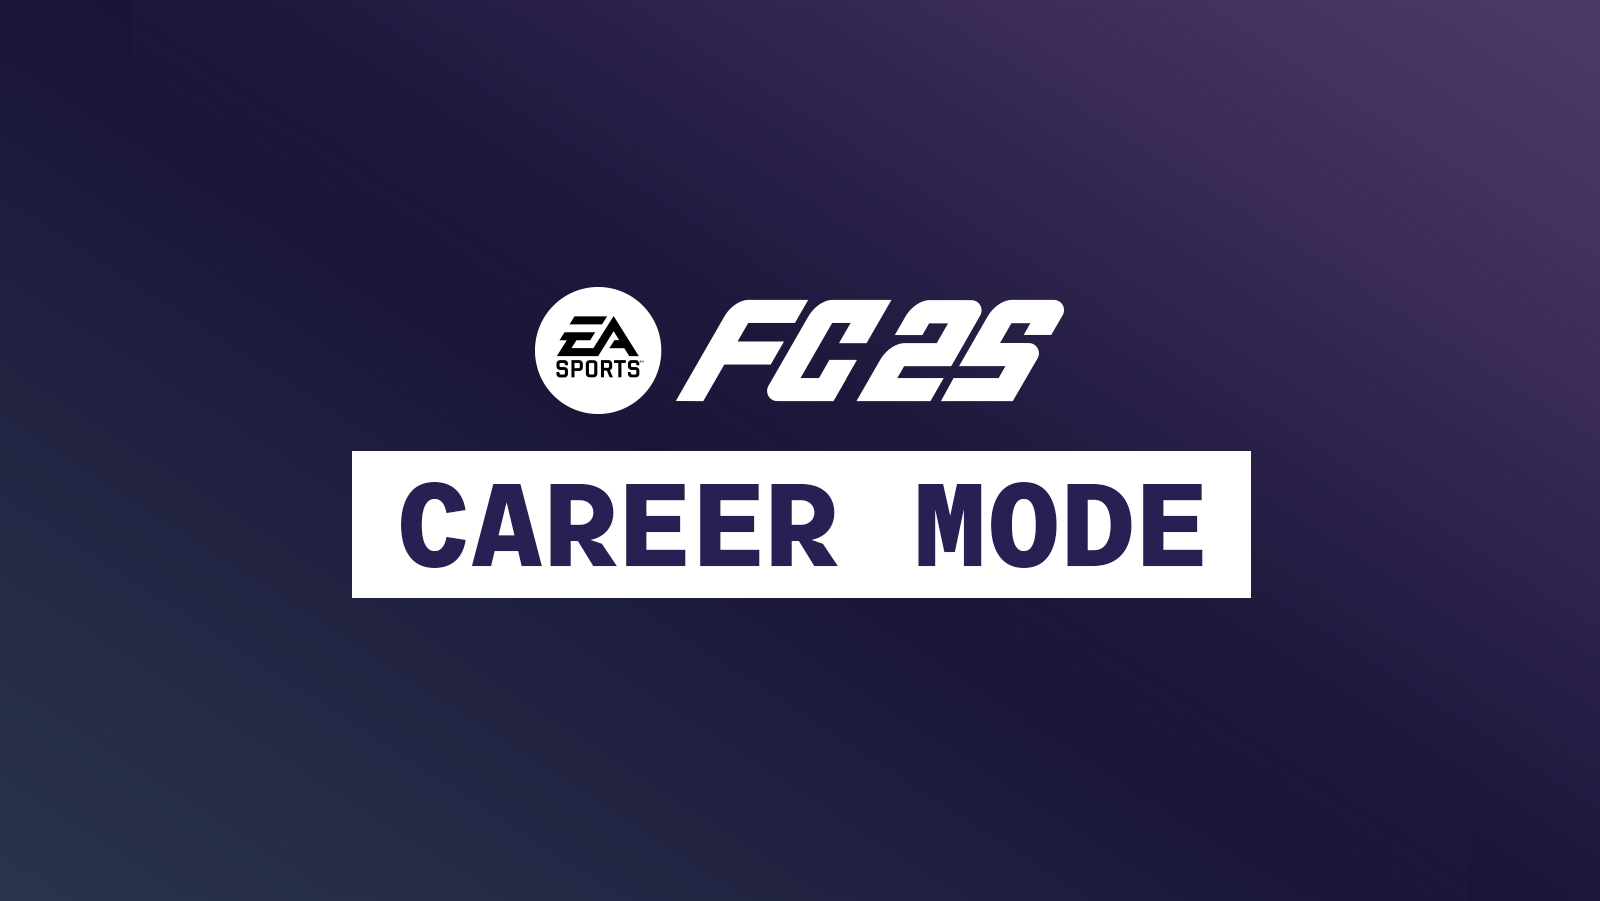 EA Sports Football Club 25 Career Mode information, new features and details.